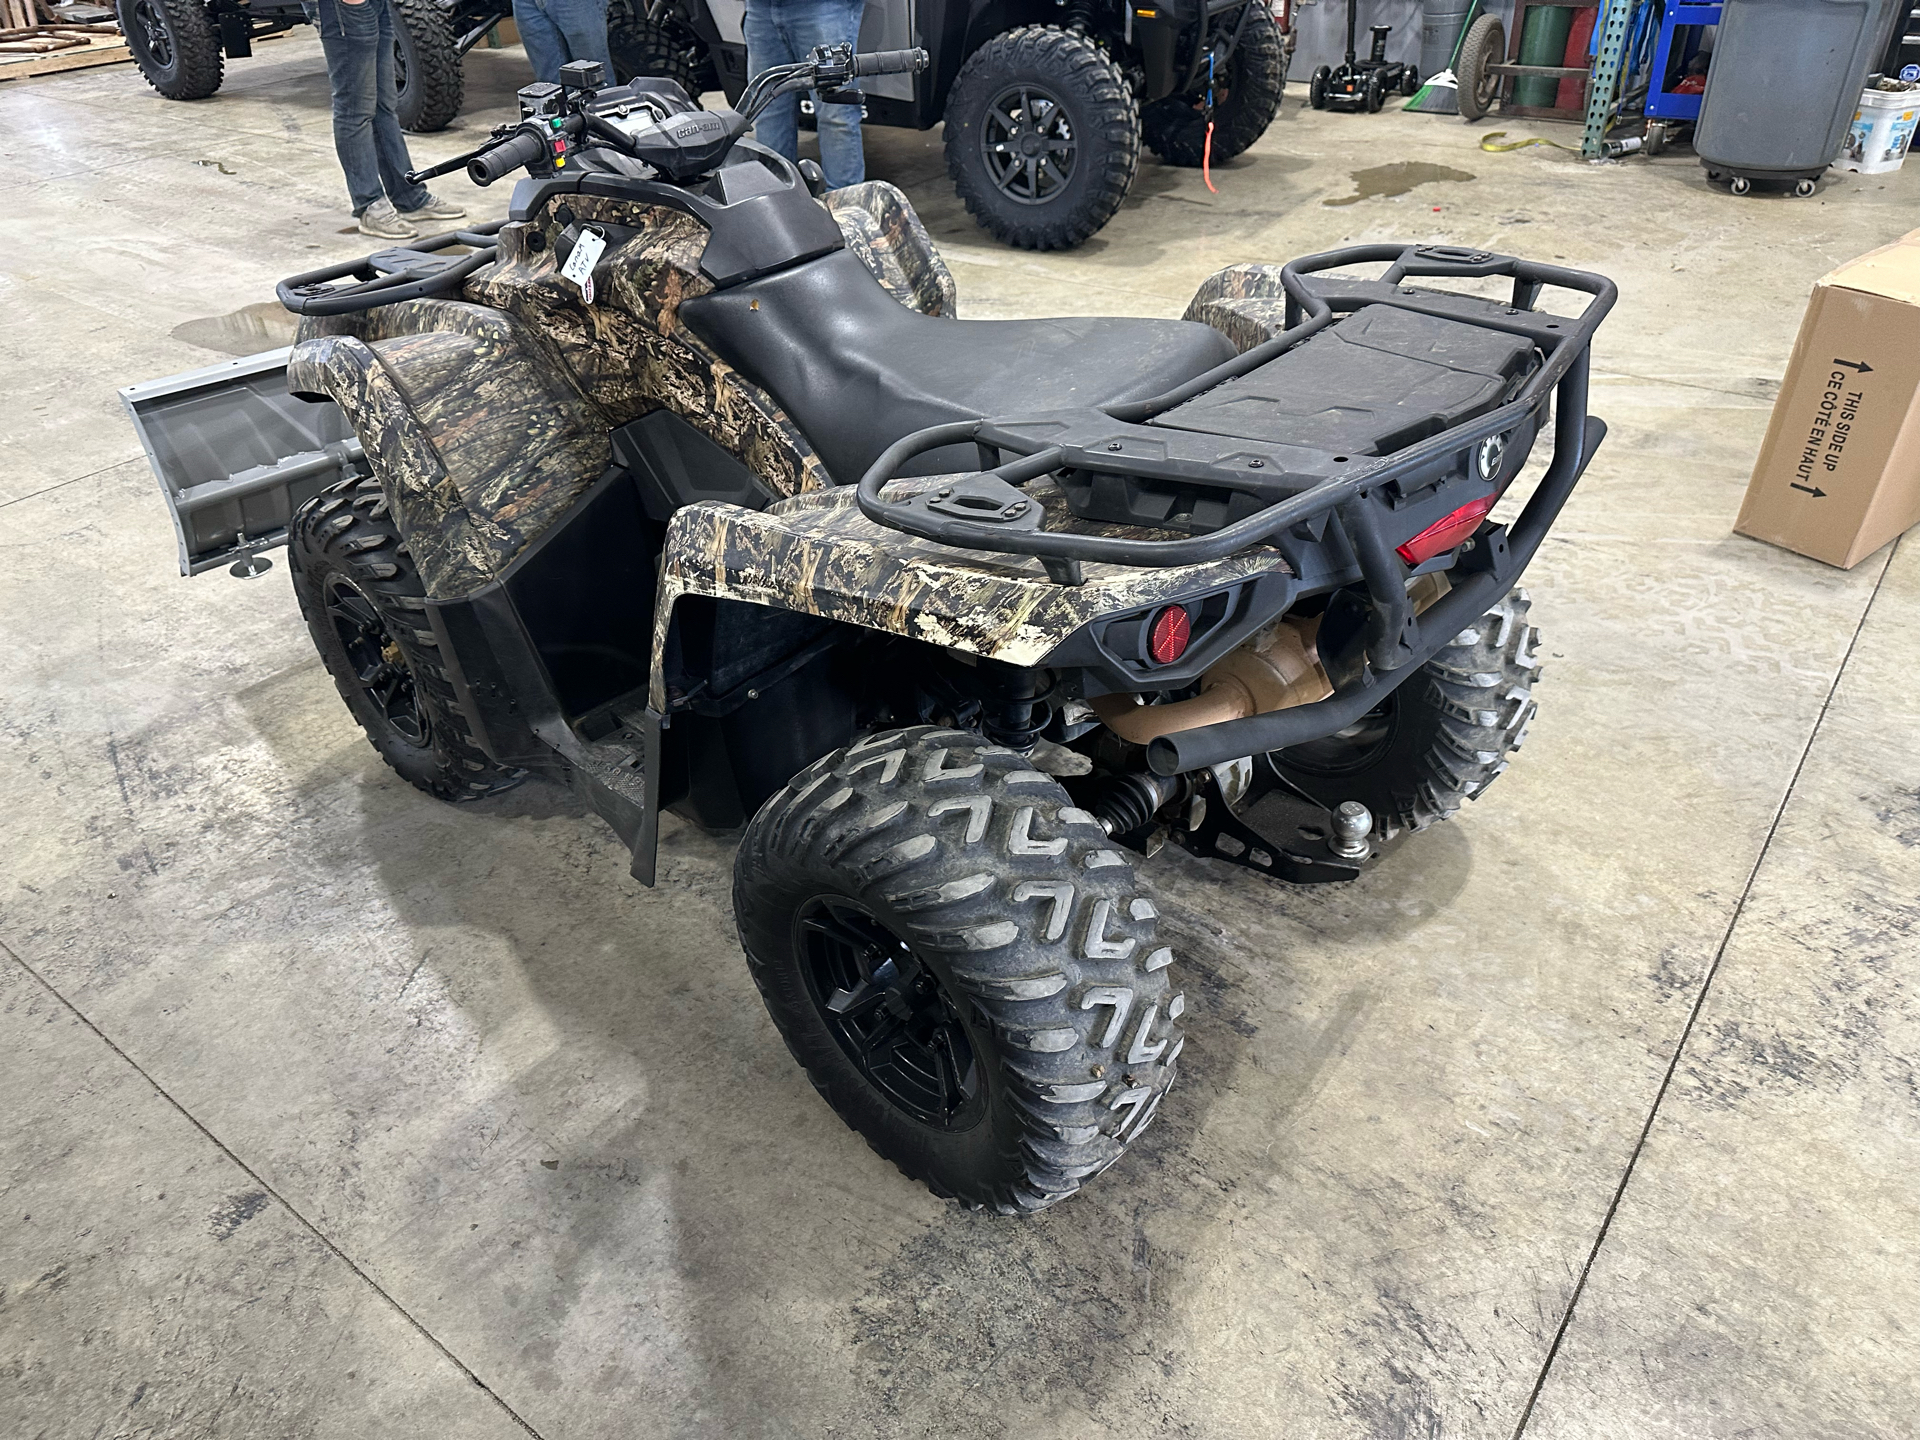 2018 Can-Am Outlander DPS 570 in Sidney, Ohio - Photo 13